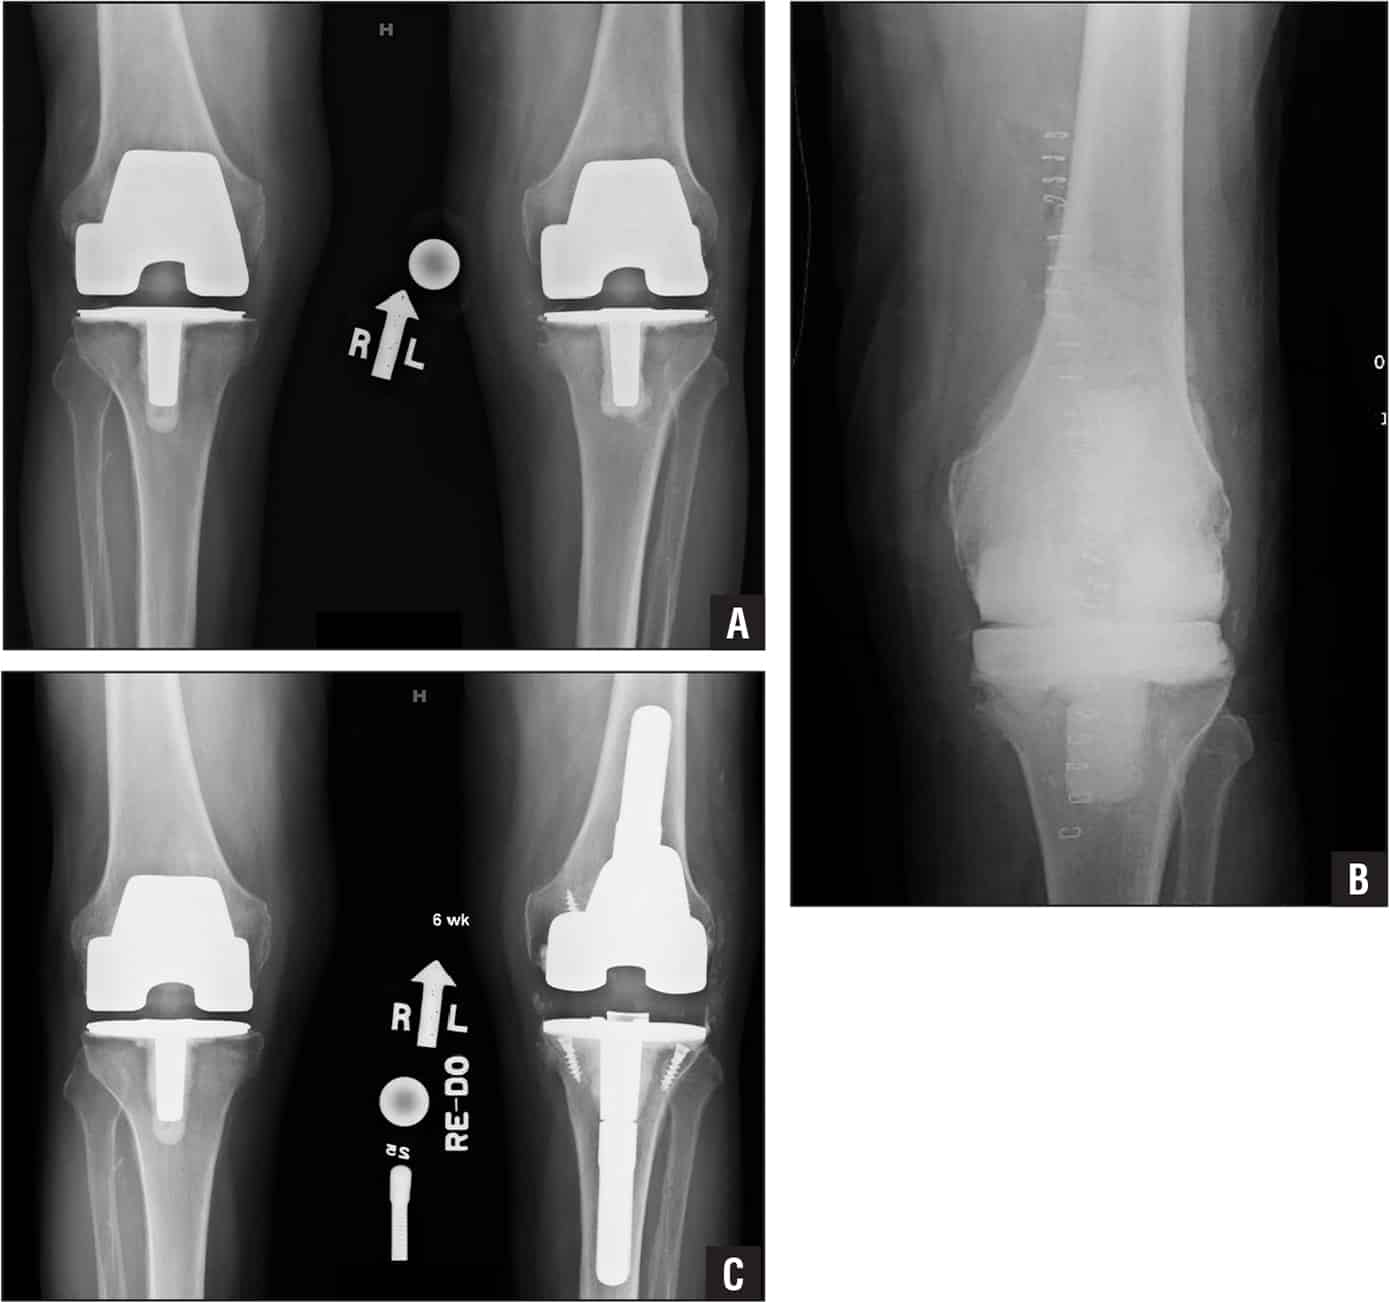 Midterm Results of the Vanguard SSK Revision Total Knee Arthroplasty System